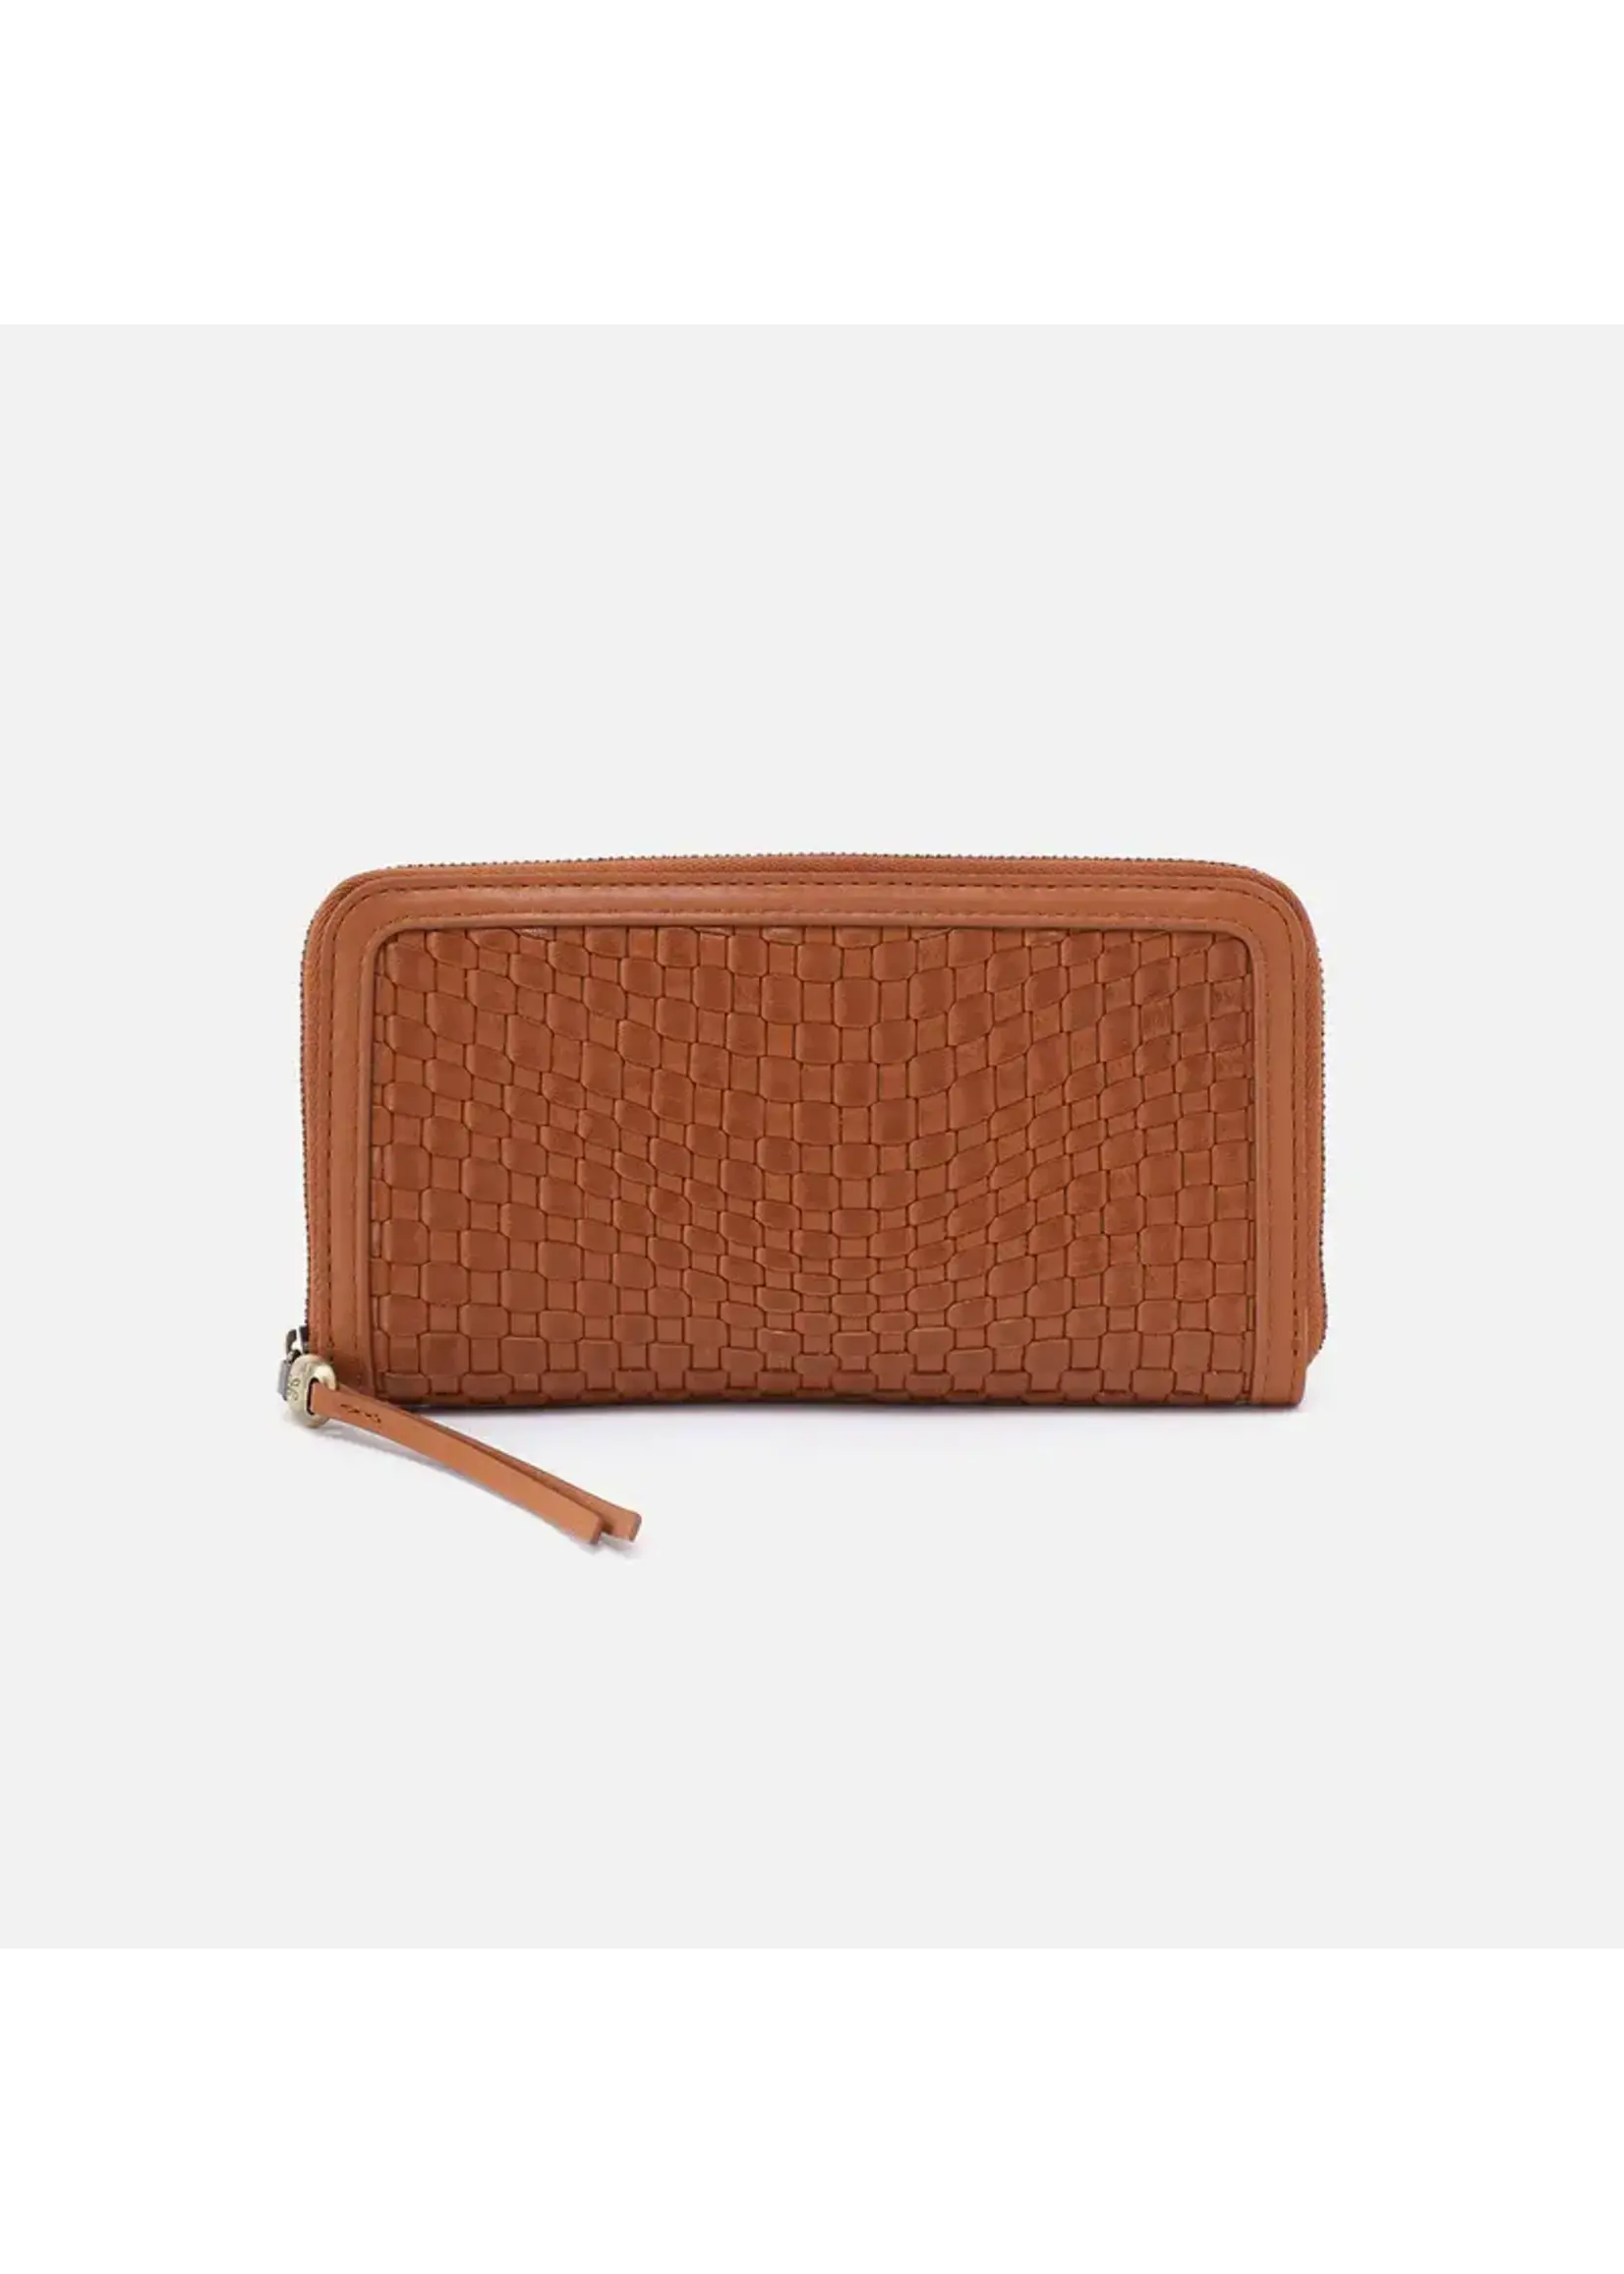 Hobo Nila Large Zip Around Continental Wallet - Wave Weave Leather